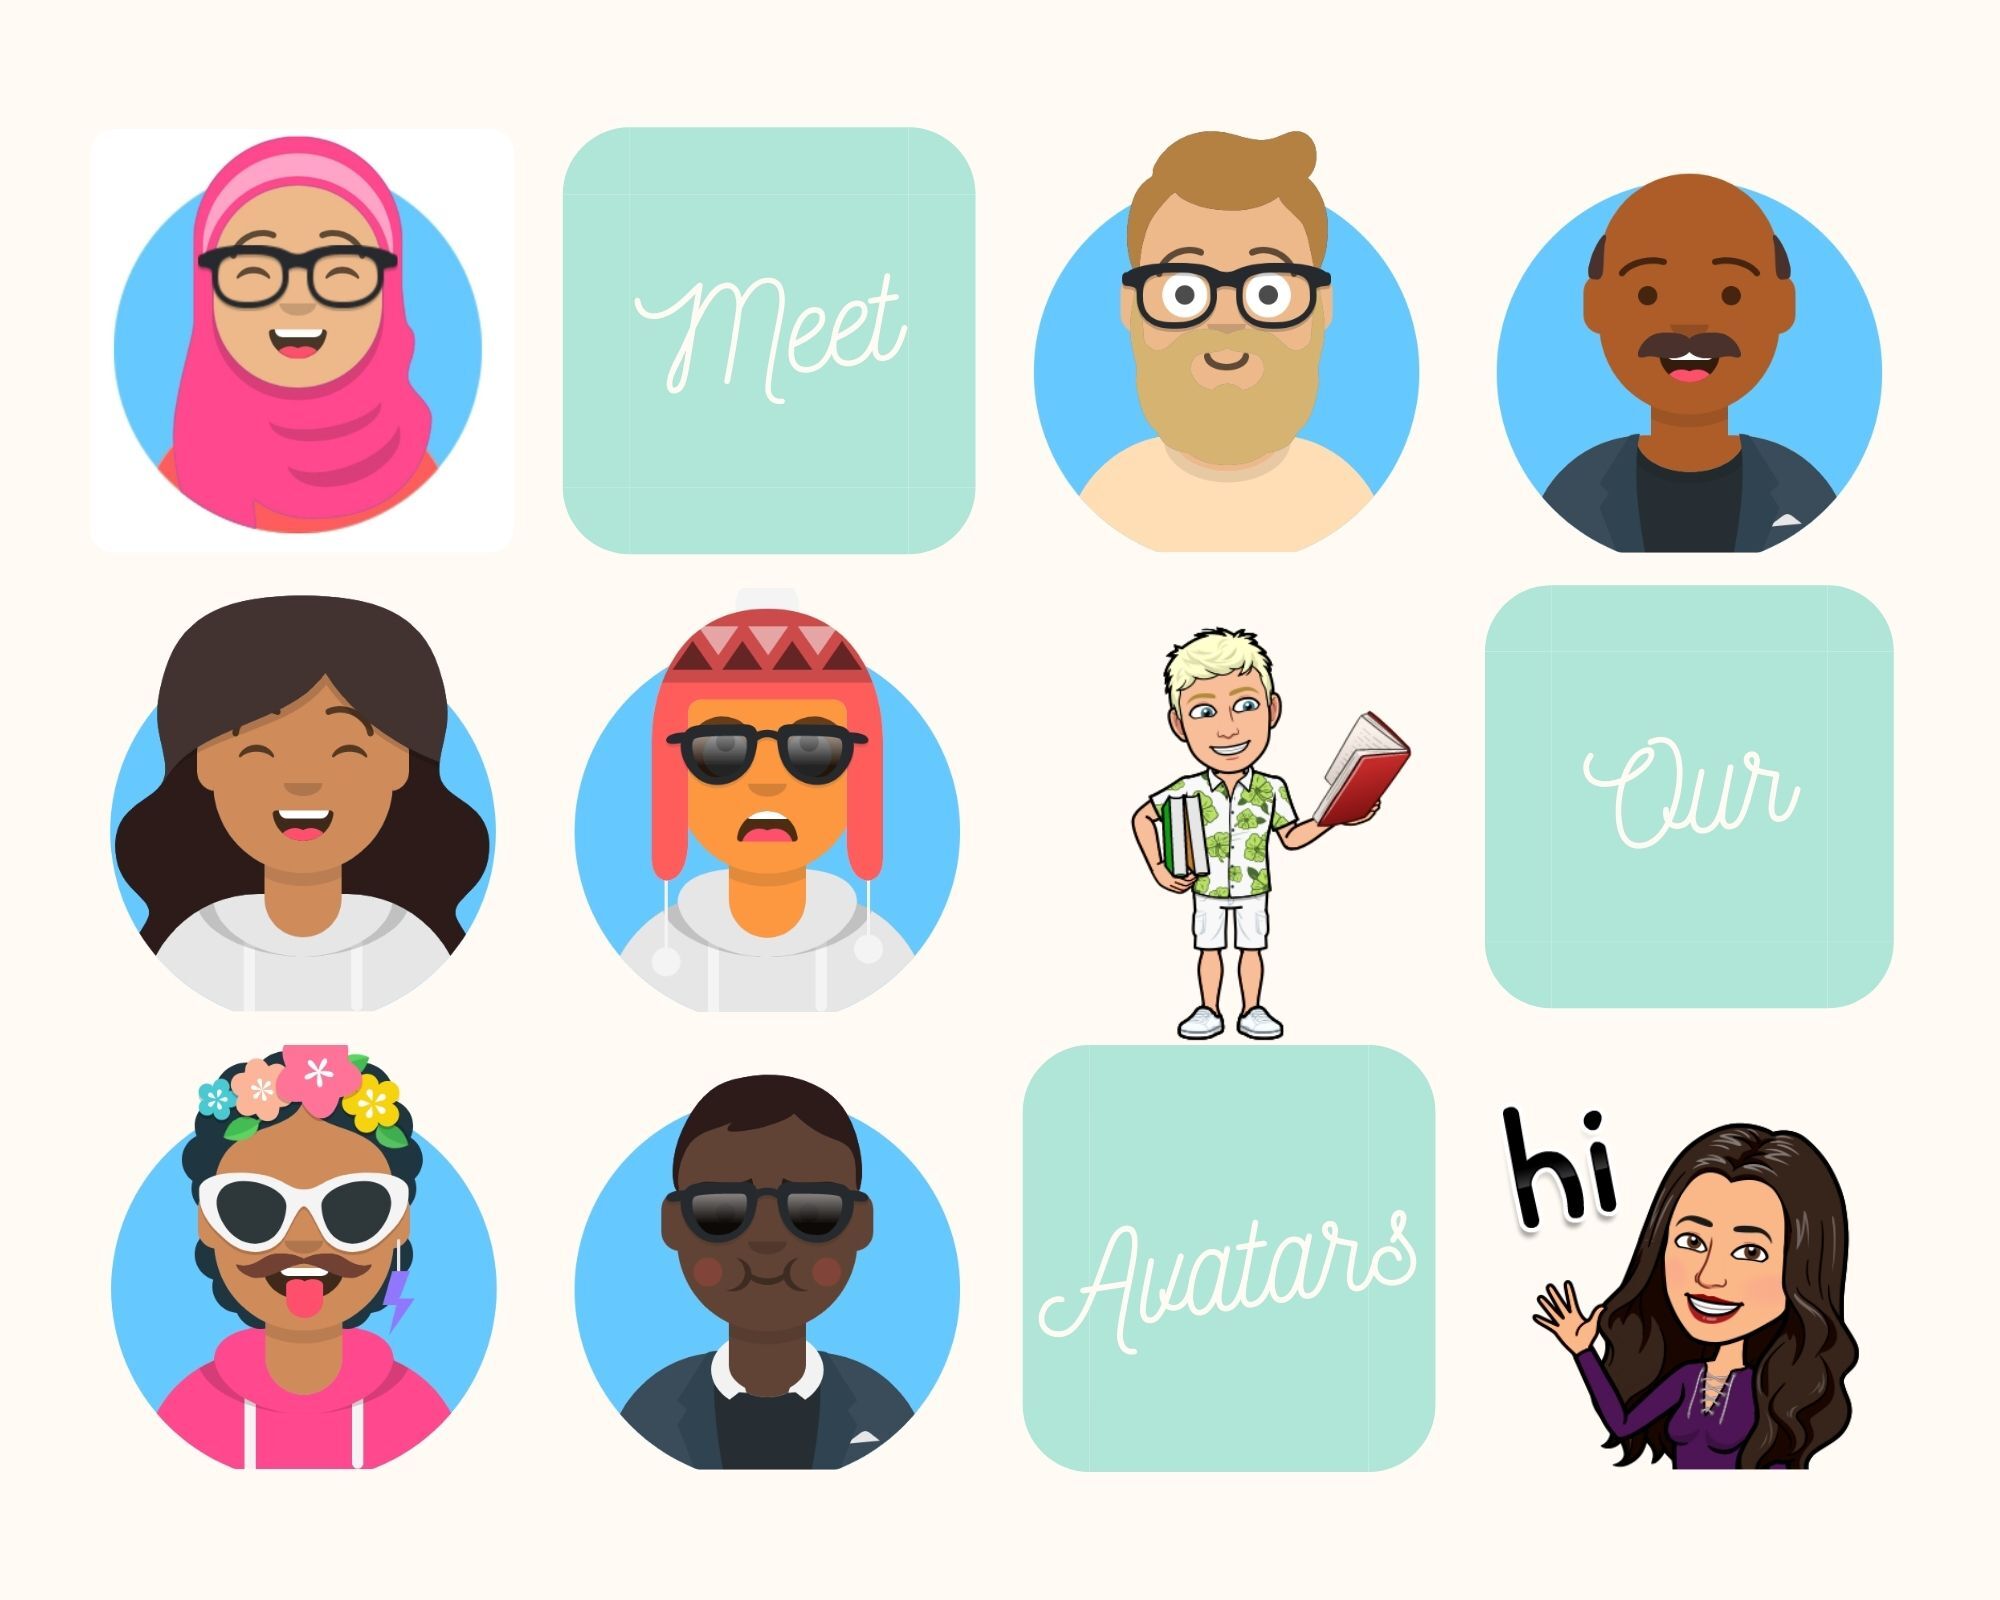 Animated emoji versions of our tutees and tutors